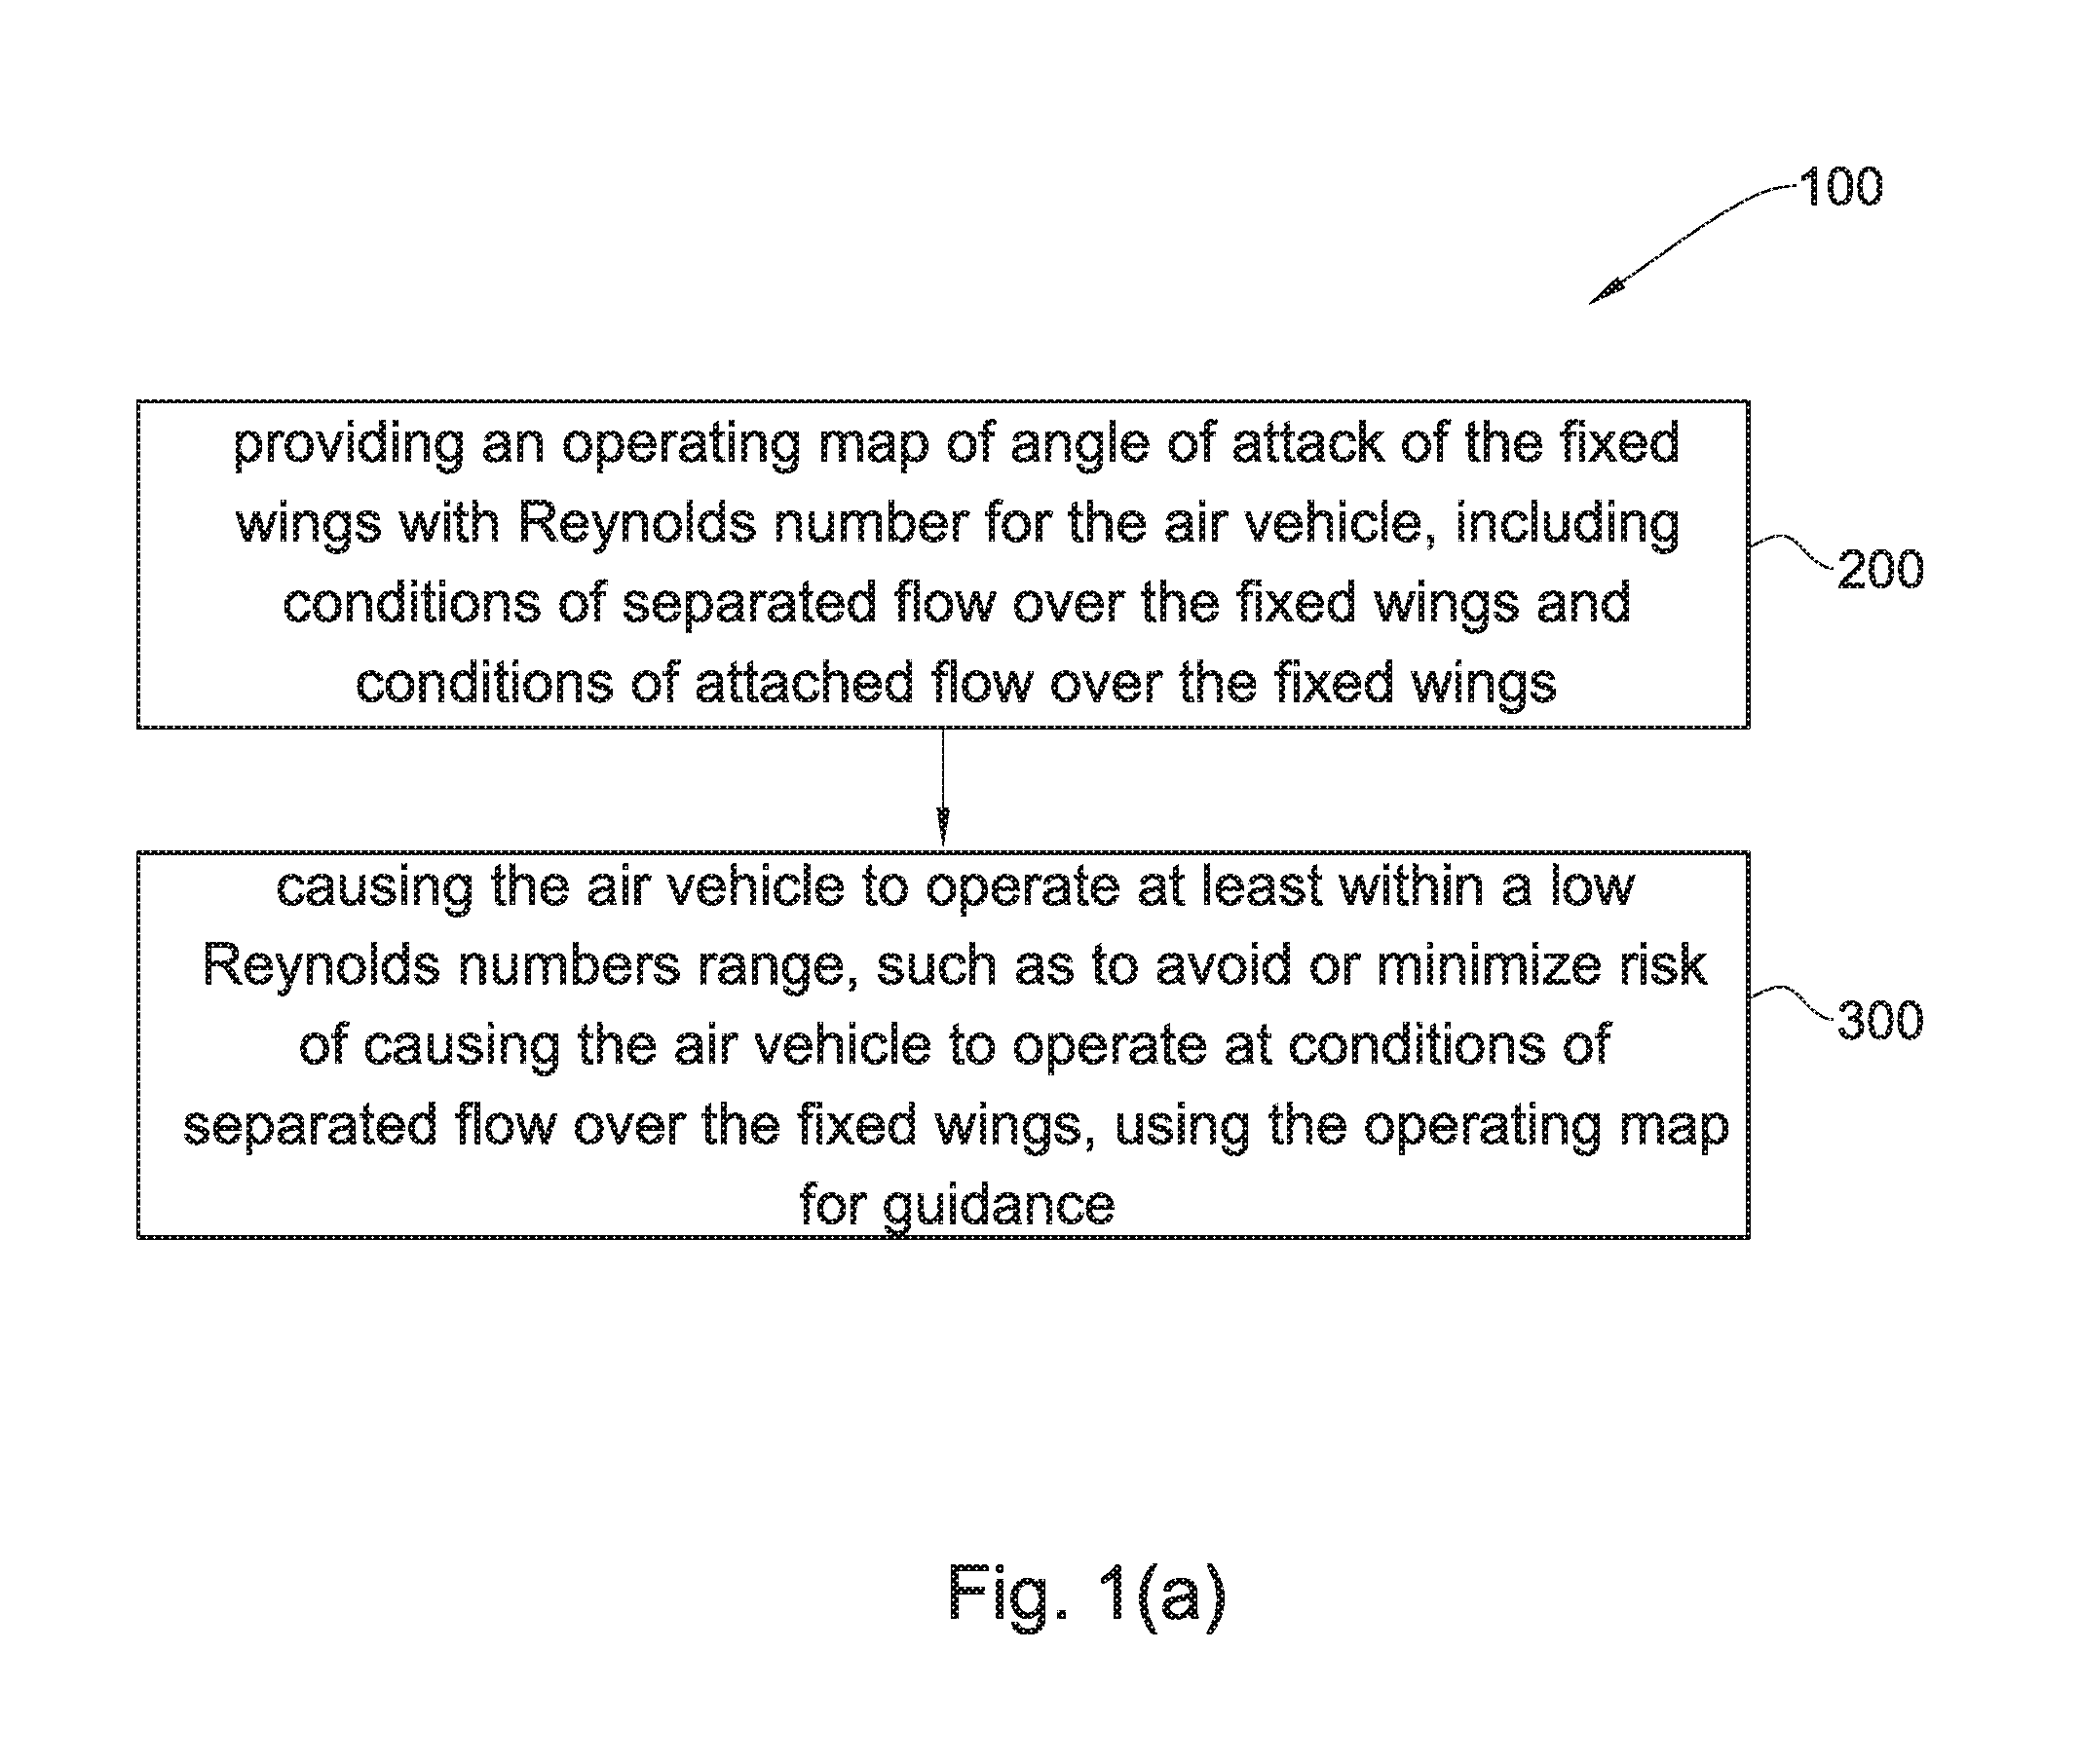 Methods for operating an air vehicle